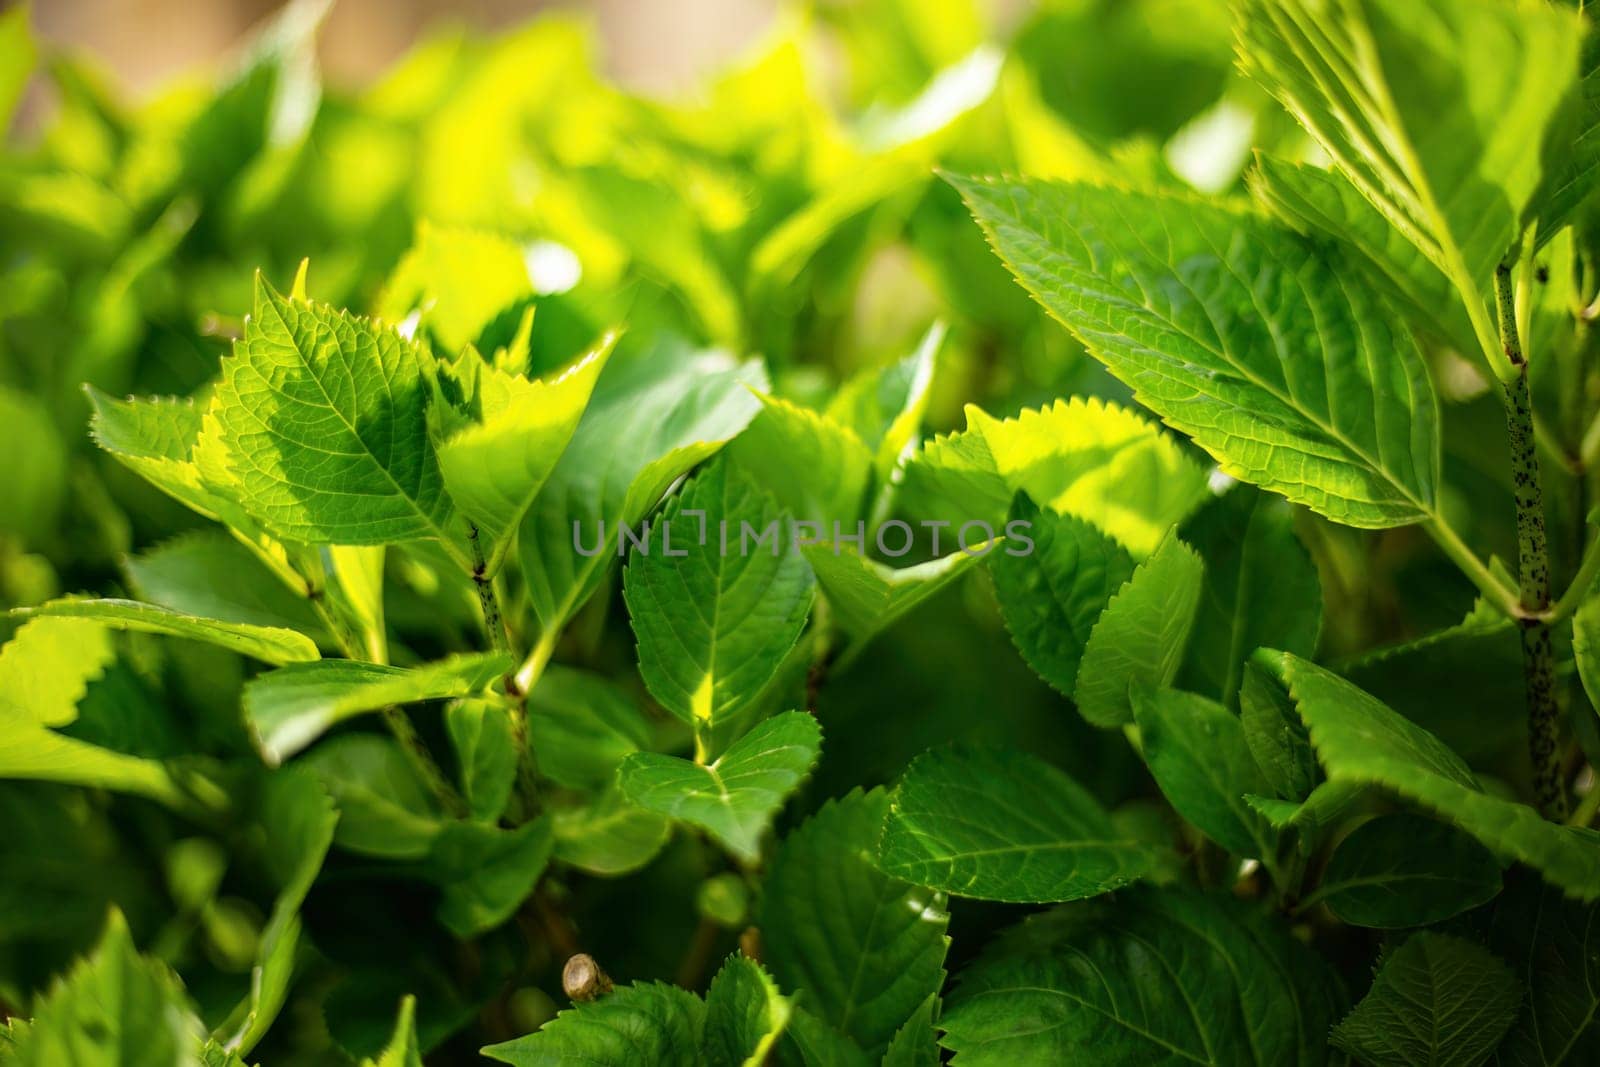 Vibrant Green Leaves Close-Up by pippocarlot